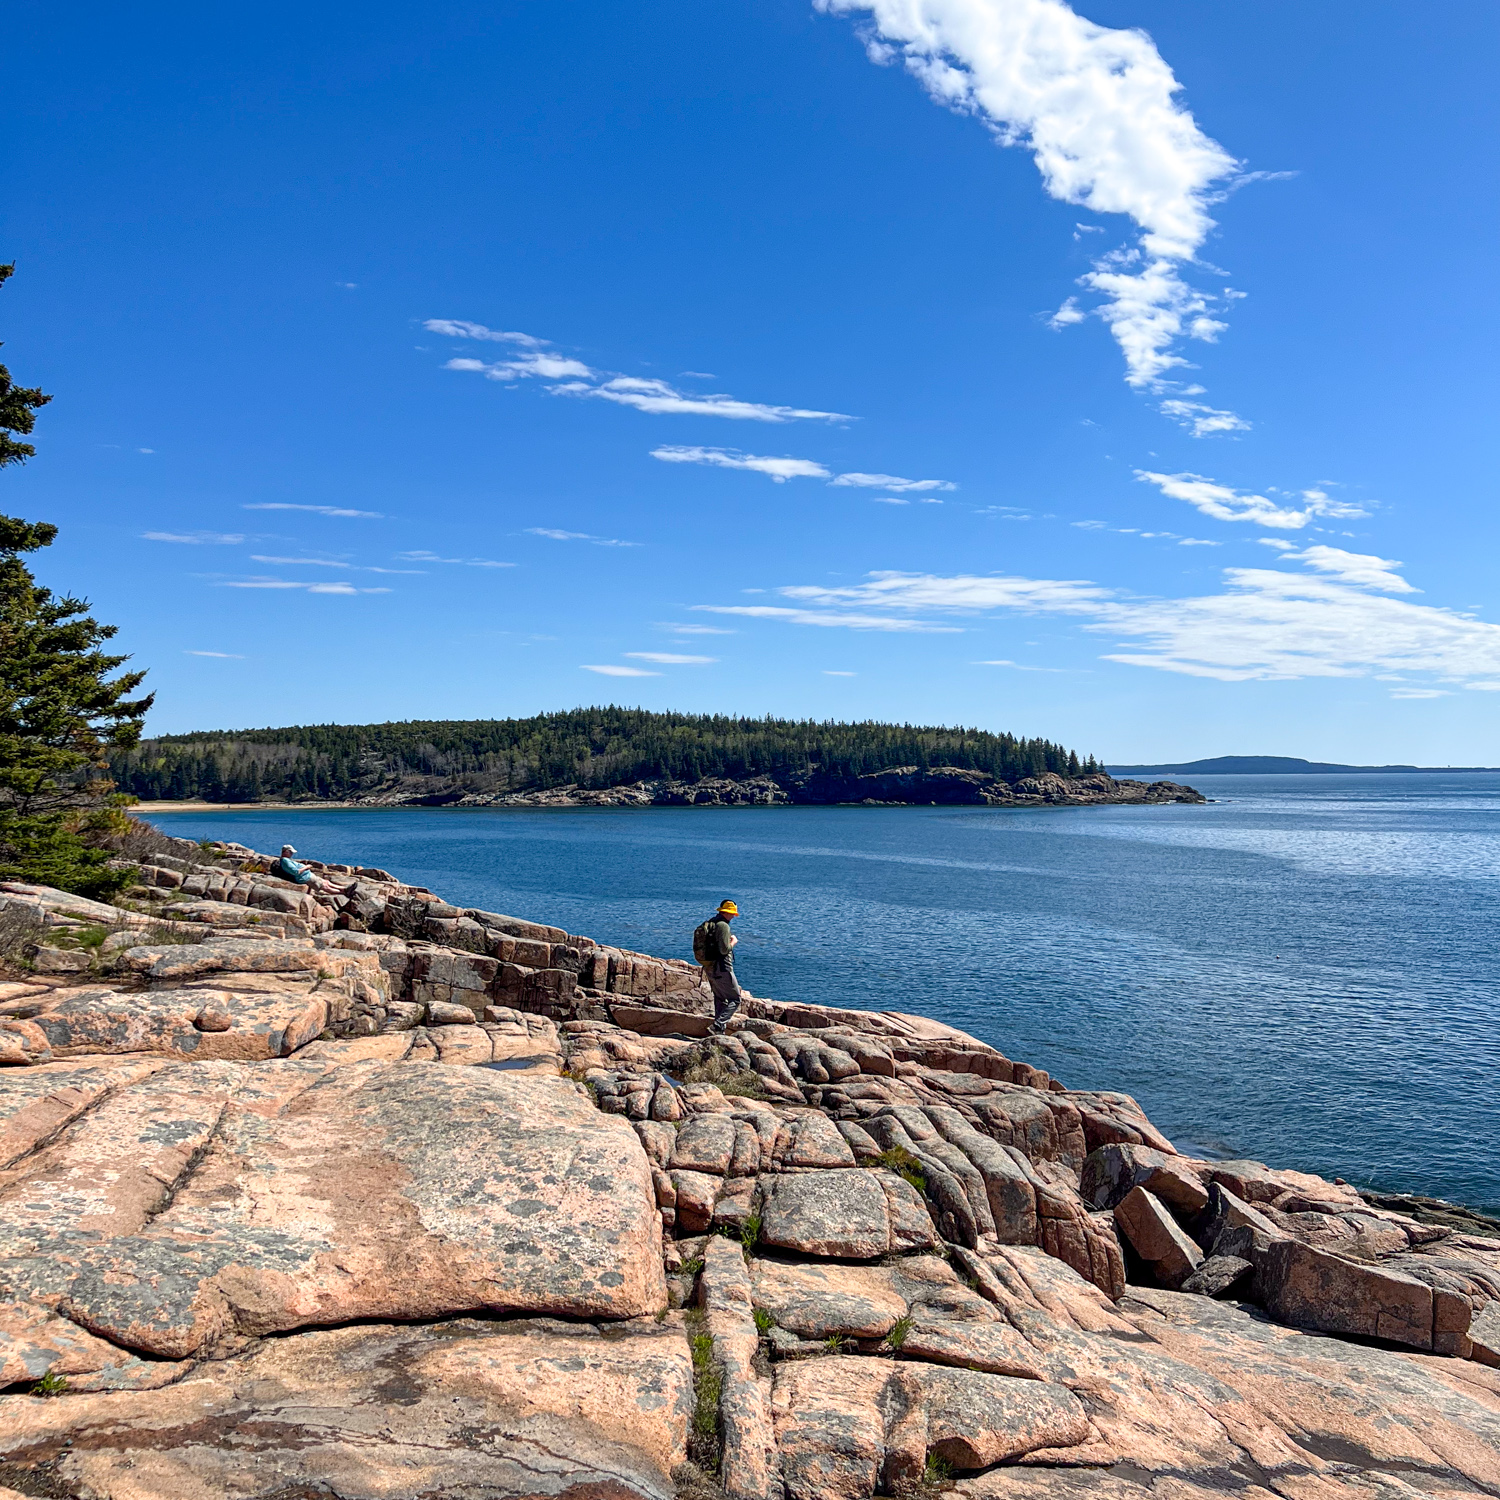 Hikers on the rocks in Acadia National Park